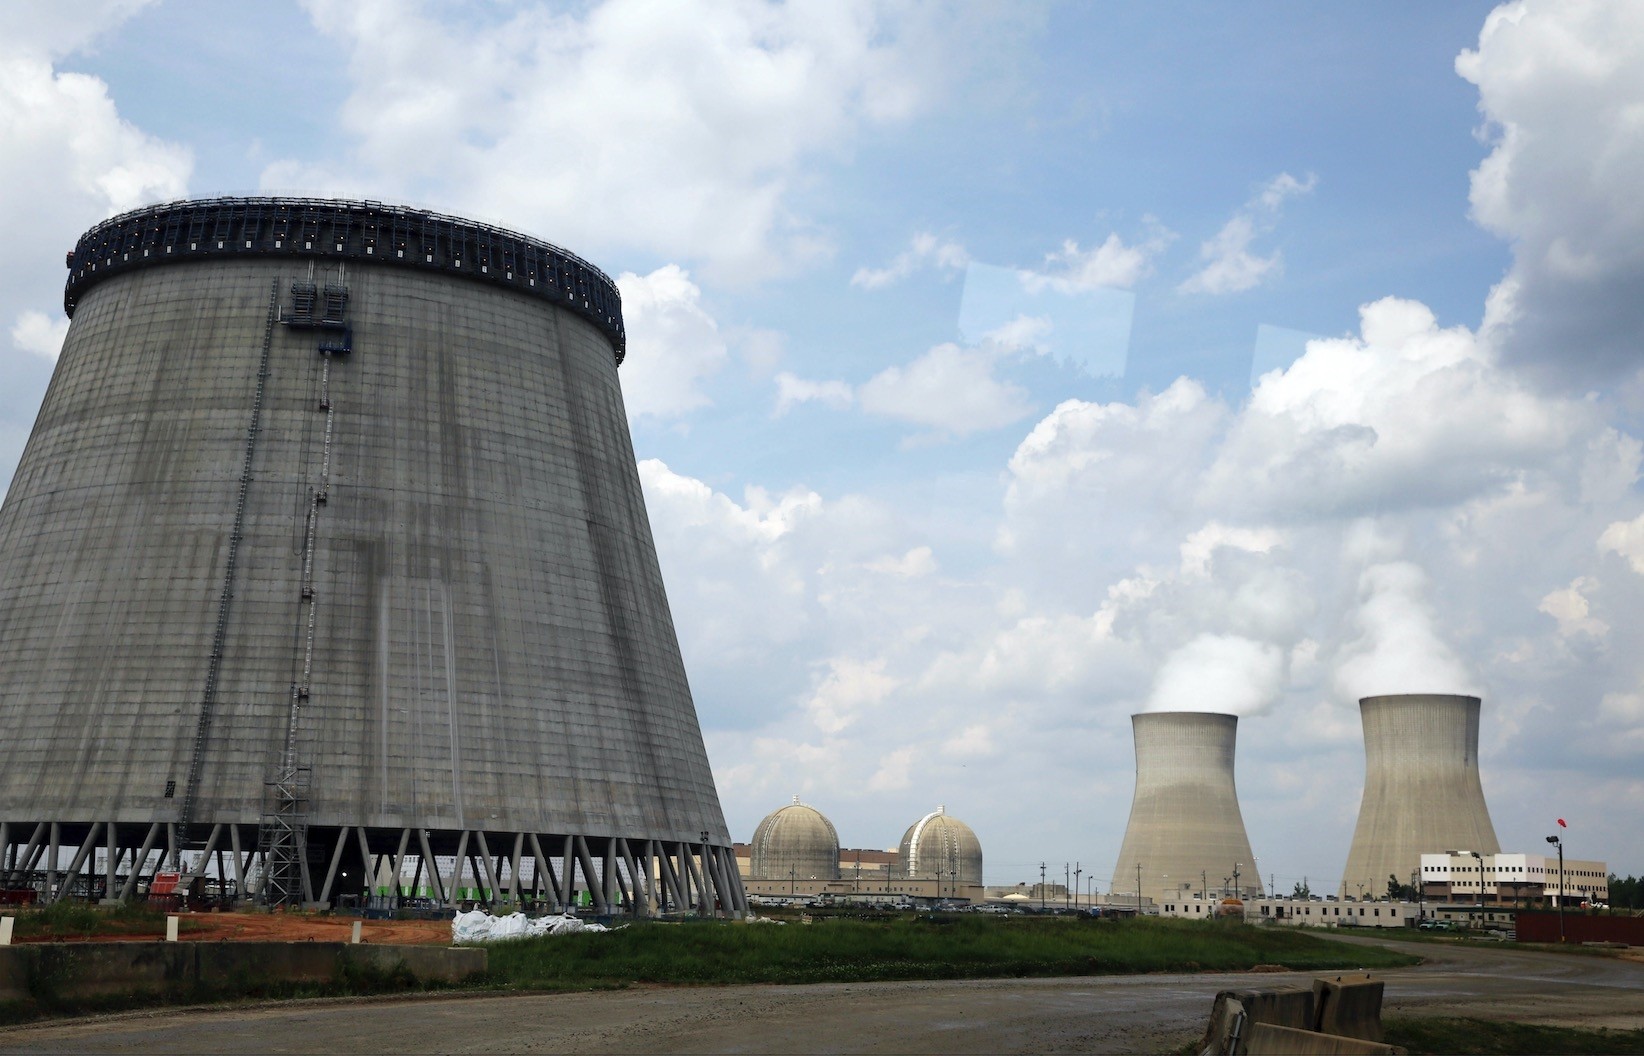 A new cooling tower for a nuclear power plant reactor thatu2019s under construction stands near the two operating reactors at Plant Vogtle power plant in Waynesboro, Ga., operated by Westinghouse Electric Co., U.S. nuclear unit of Japanu2019s Toshiba Corp.